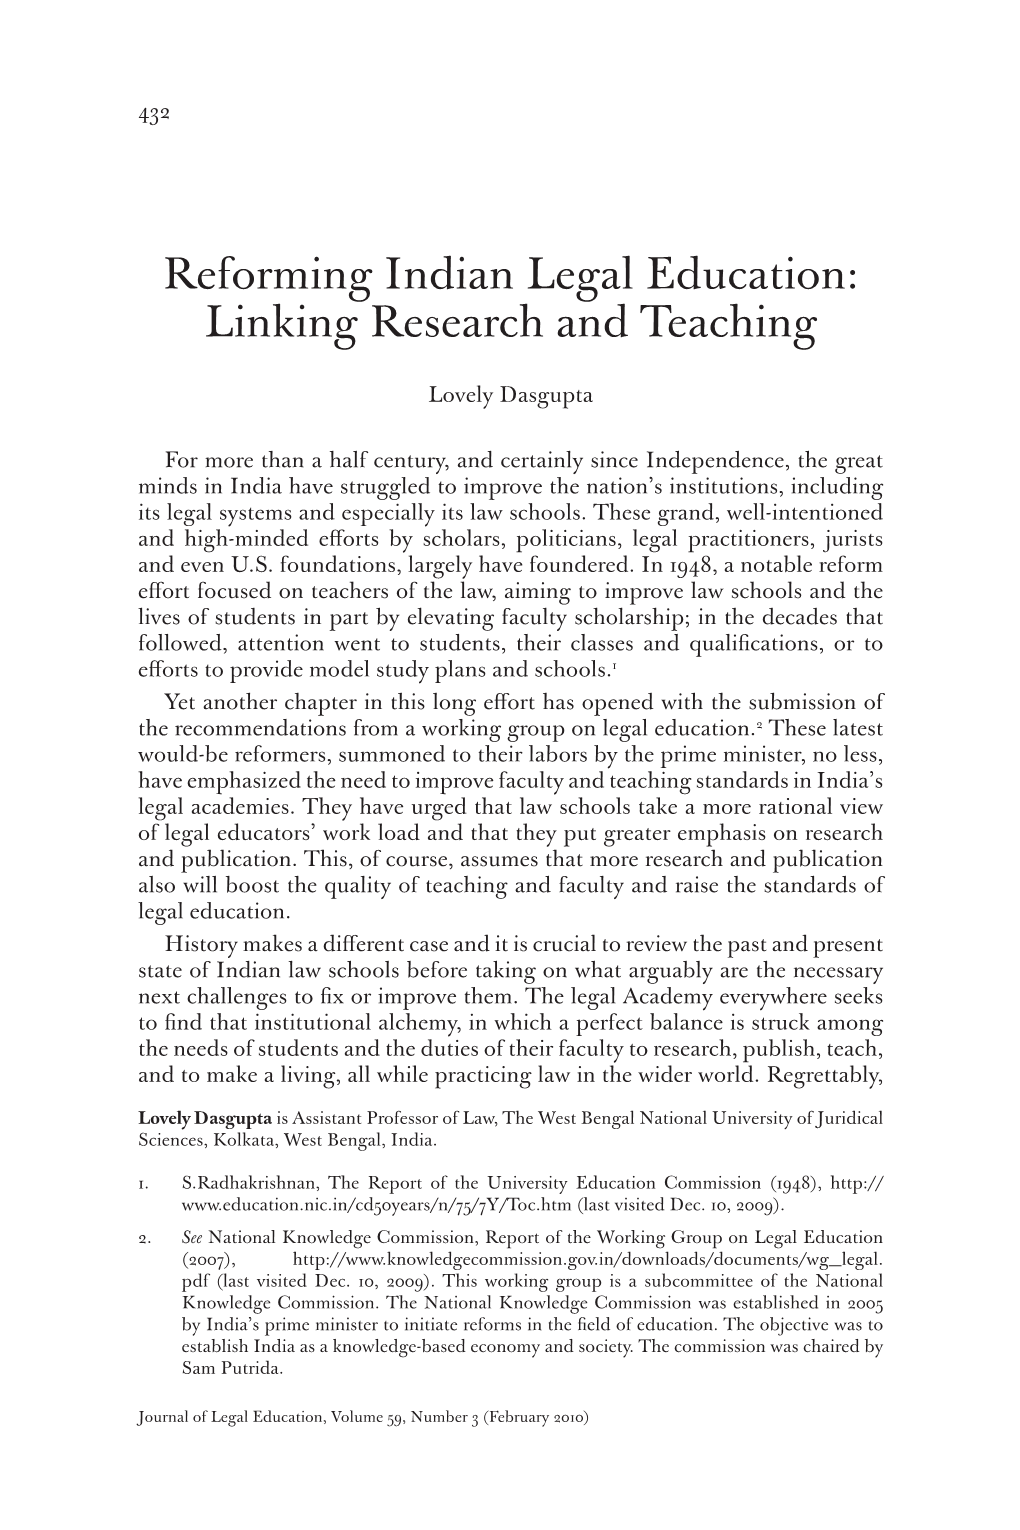 Reforming Indian Legal Education: Linking Research and Teaching